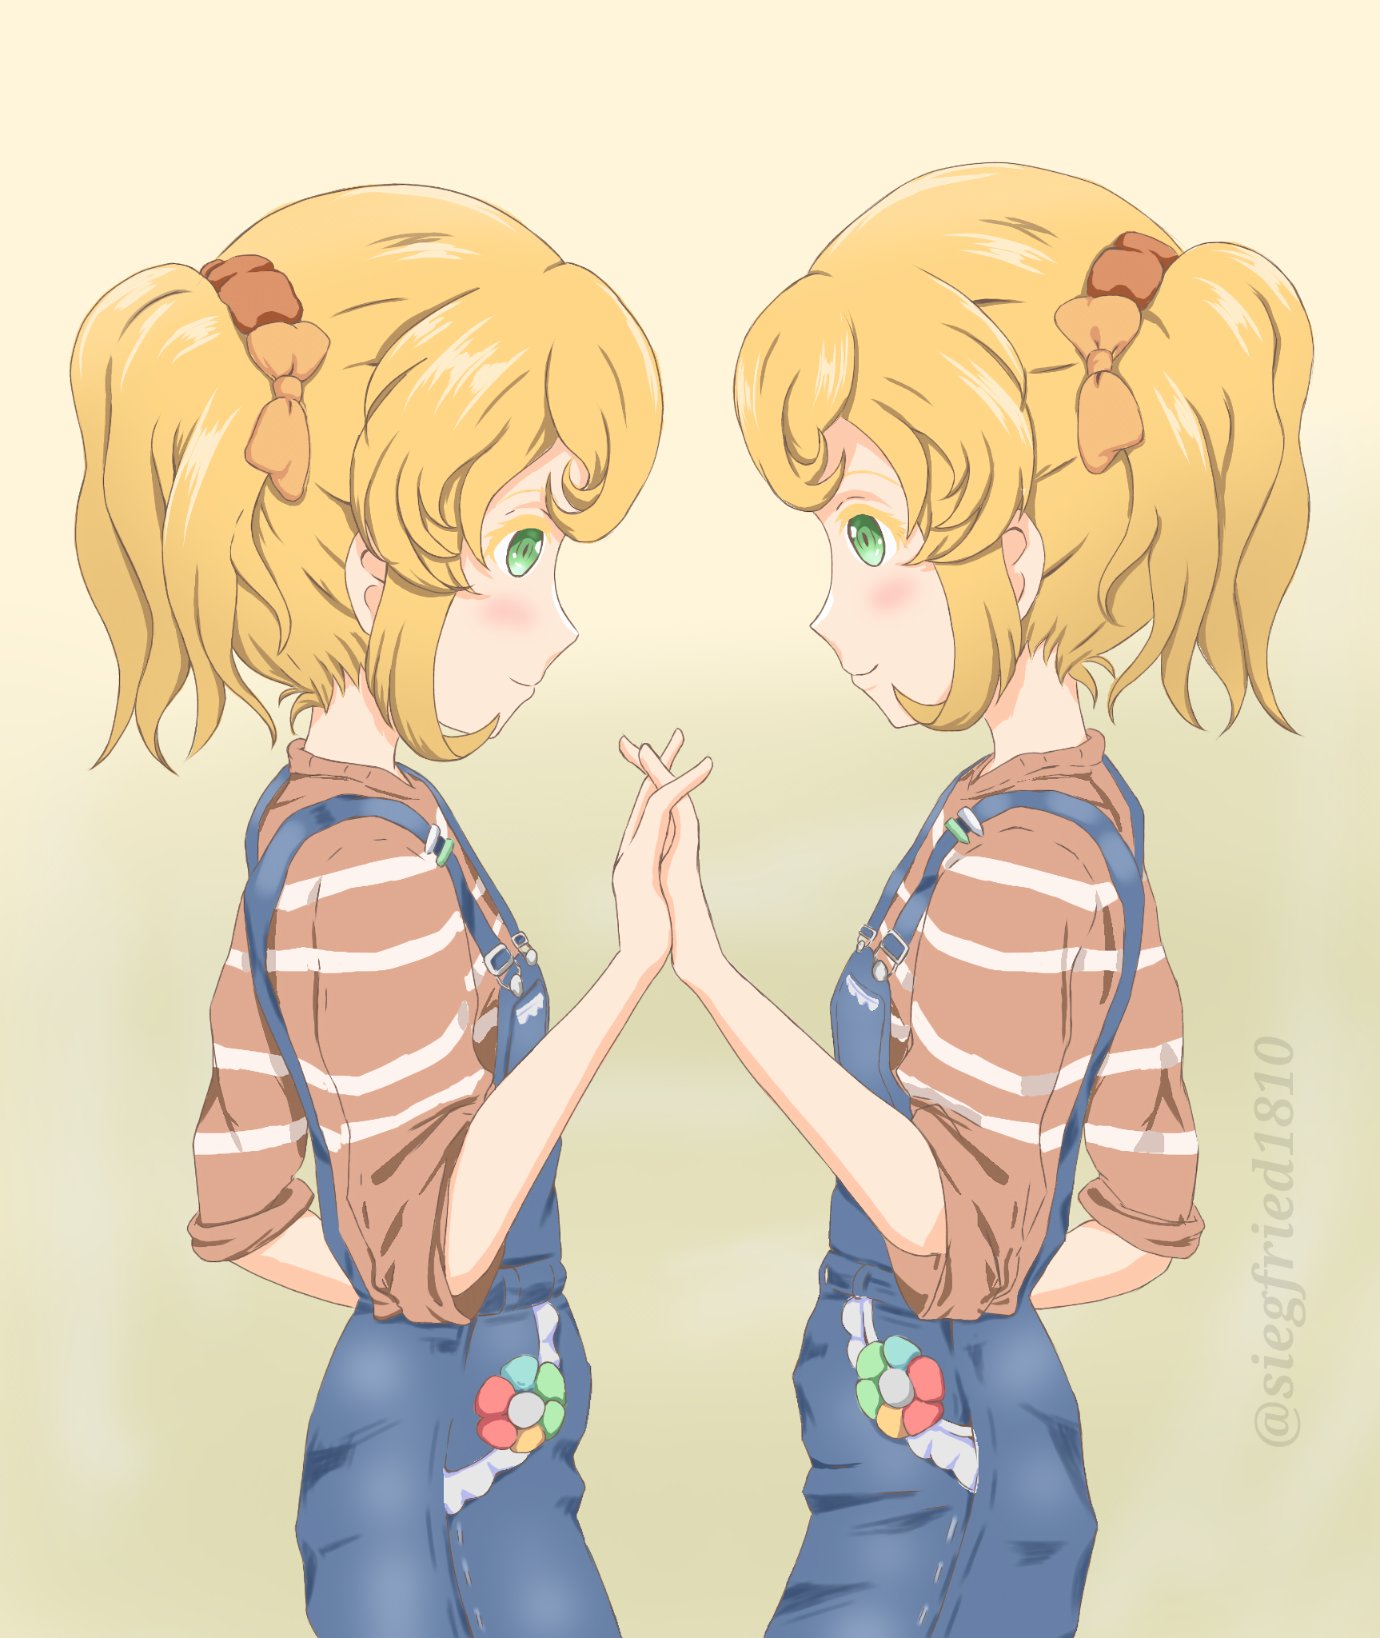 2girls blonde_hair face-to-face green_eyes hair_ornament highres holding_hands loli multiple_girls reverse:1999 siblings side_ponytail siegfried1810 twins twins_sleep